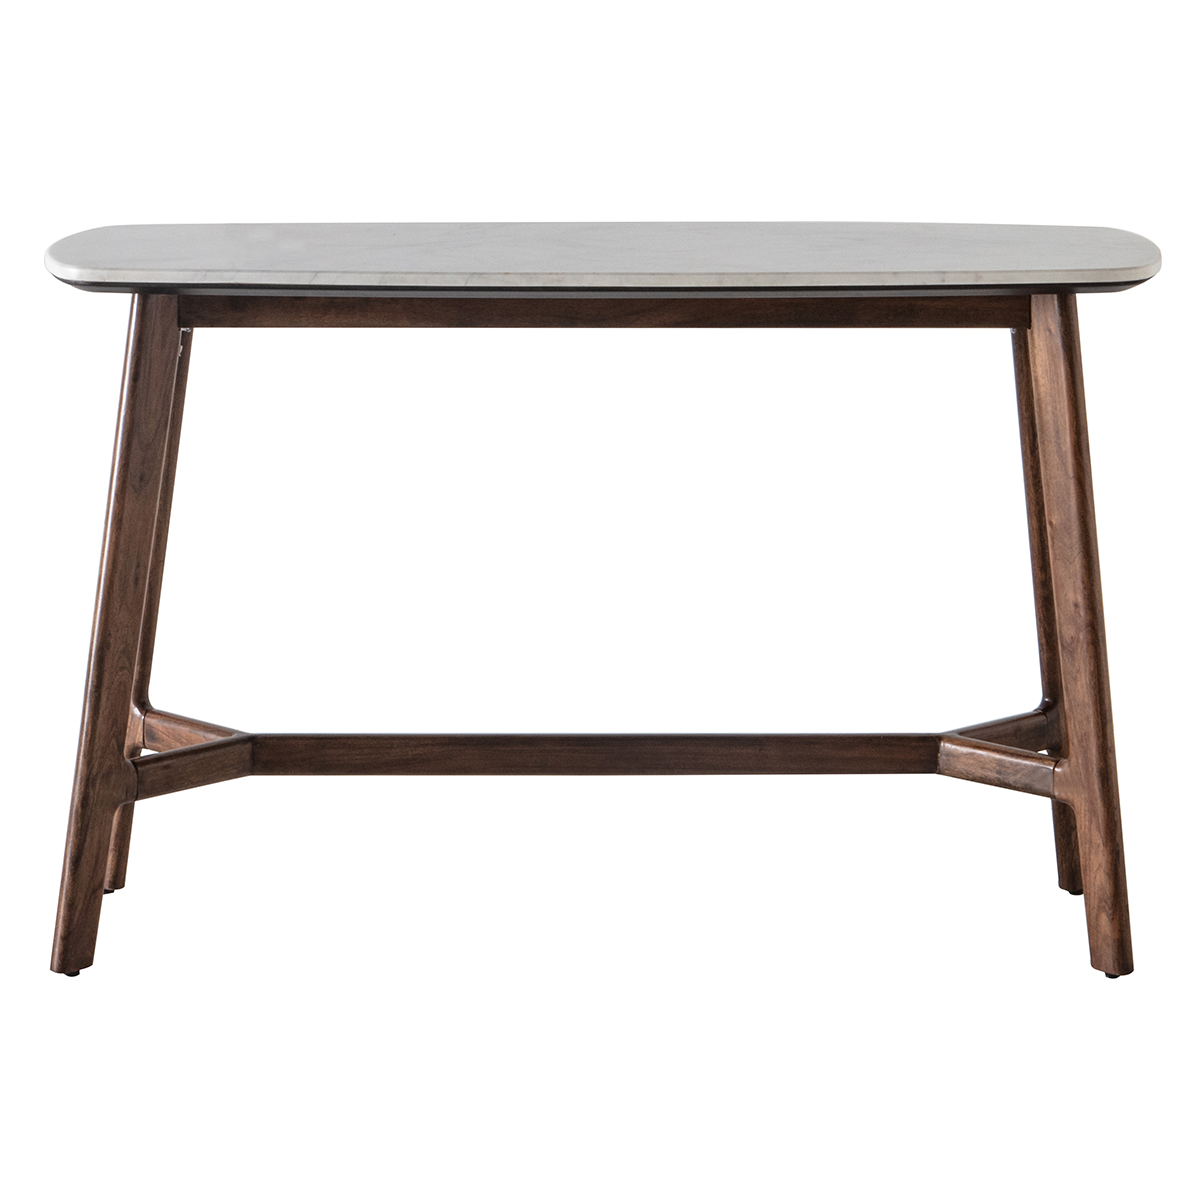 Gallery Direct Barcelona Console Table